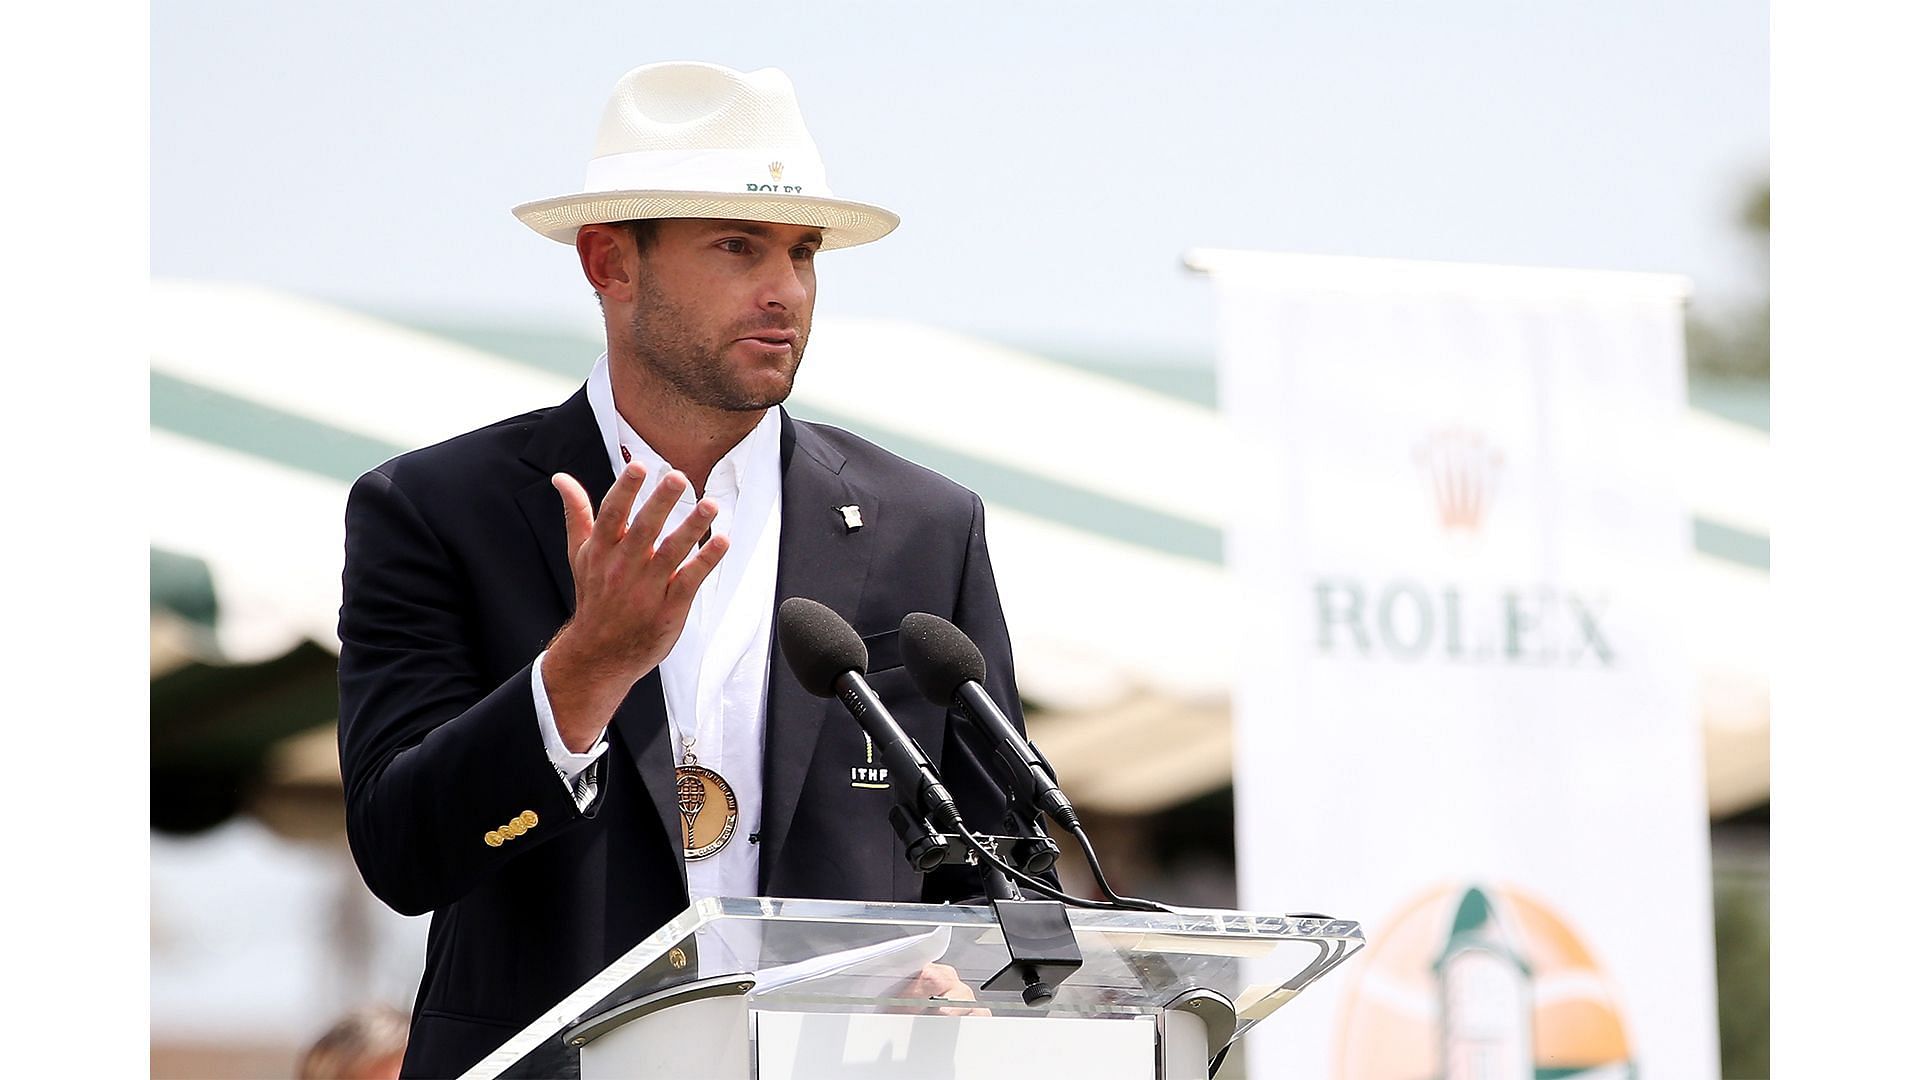 Andy Roddick is a former World No. 1